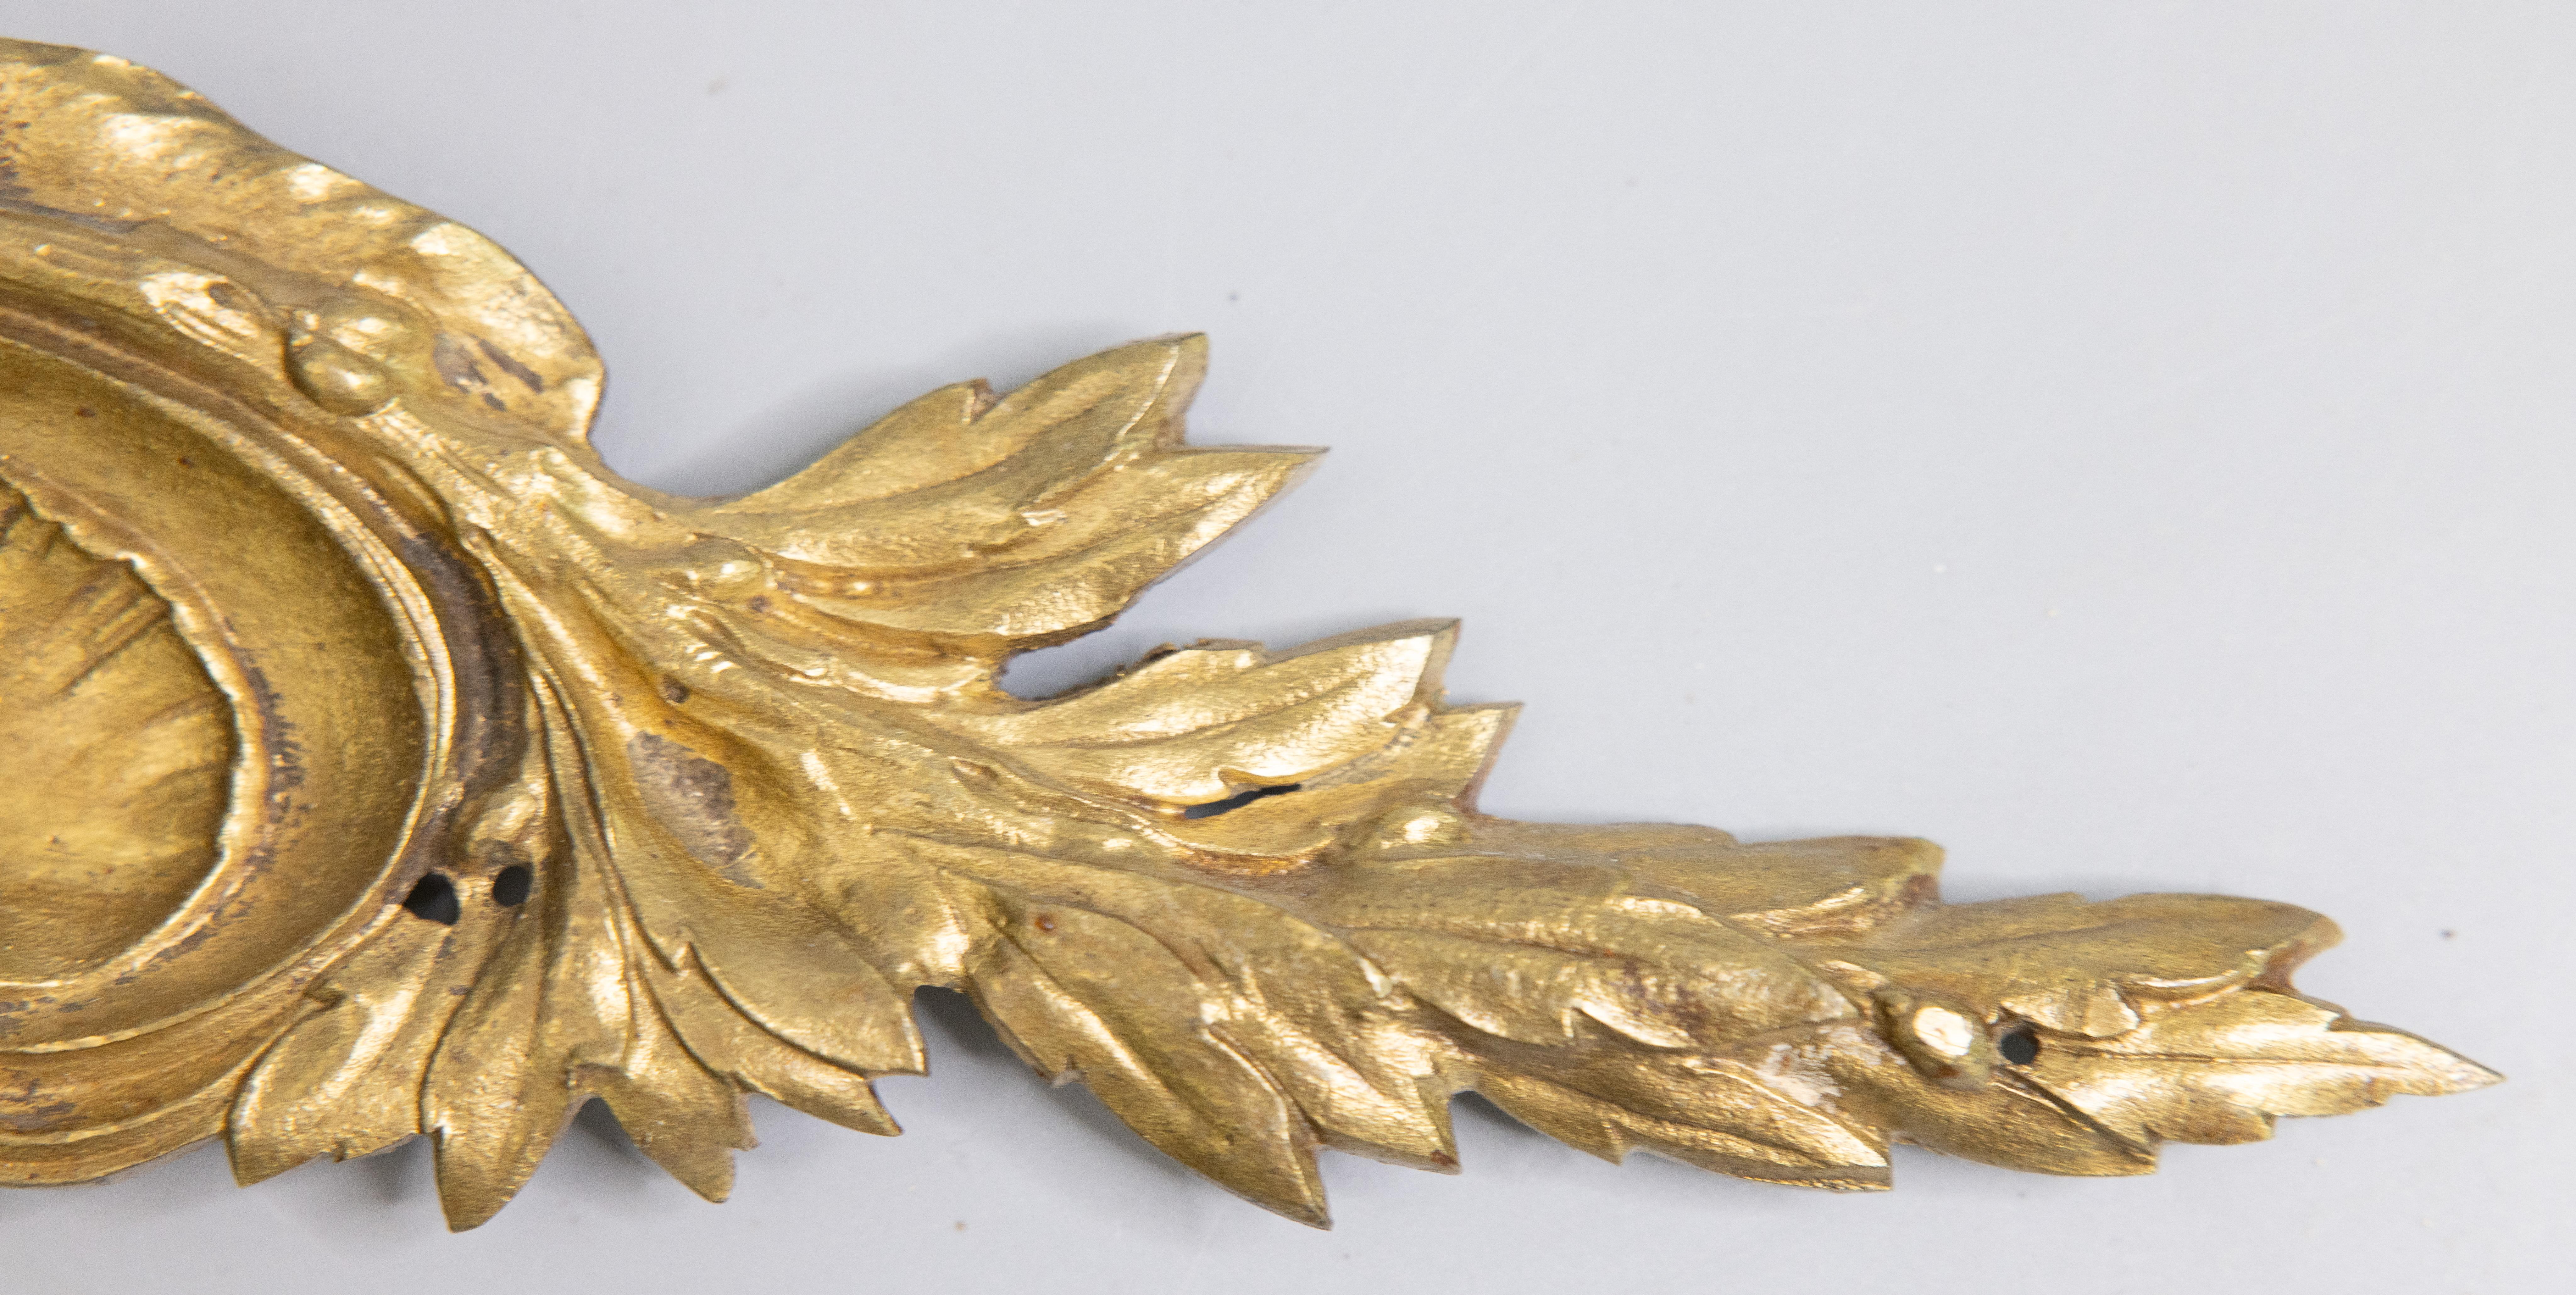 19th C. French Gilt Bronze Ormolu Cornice Appliqué Wall Swag Garland Ornament In Good Condition For Sale In Pearland, TX